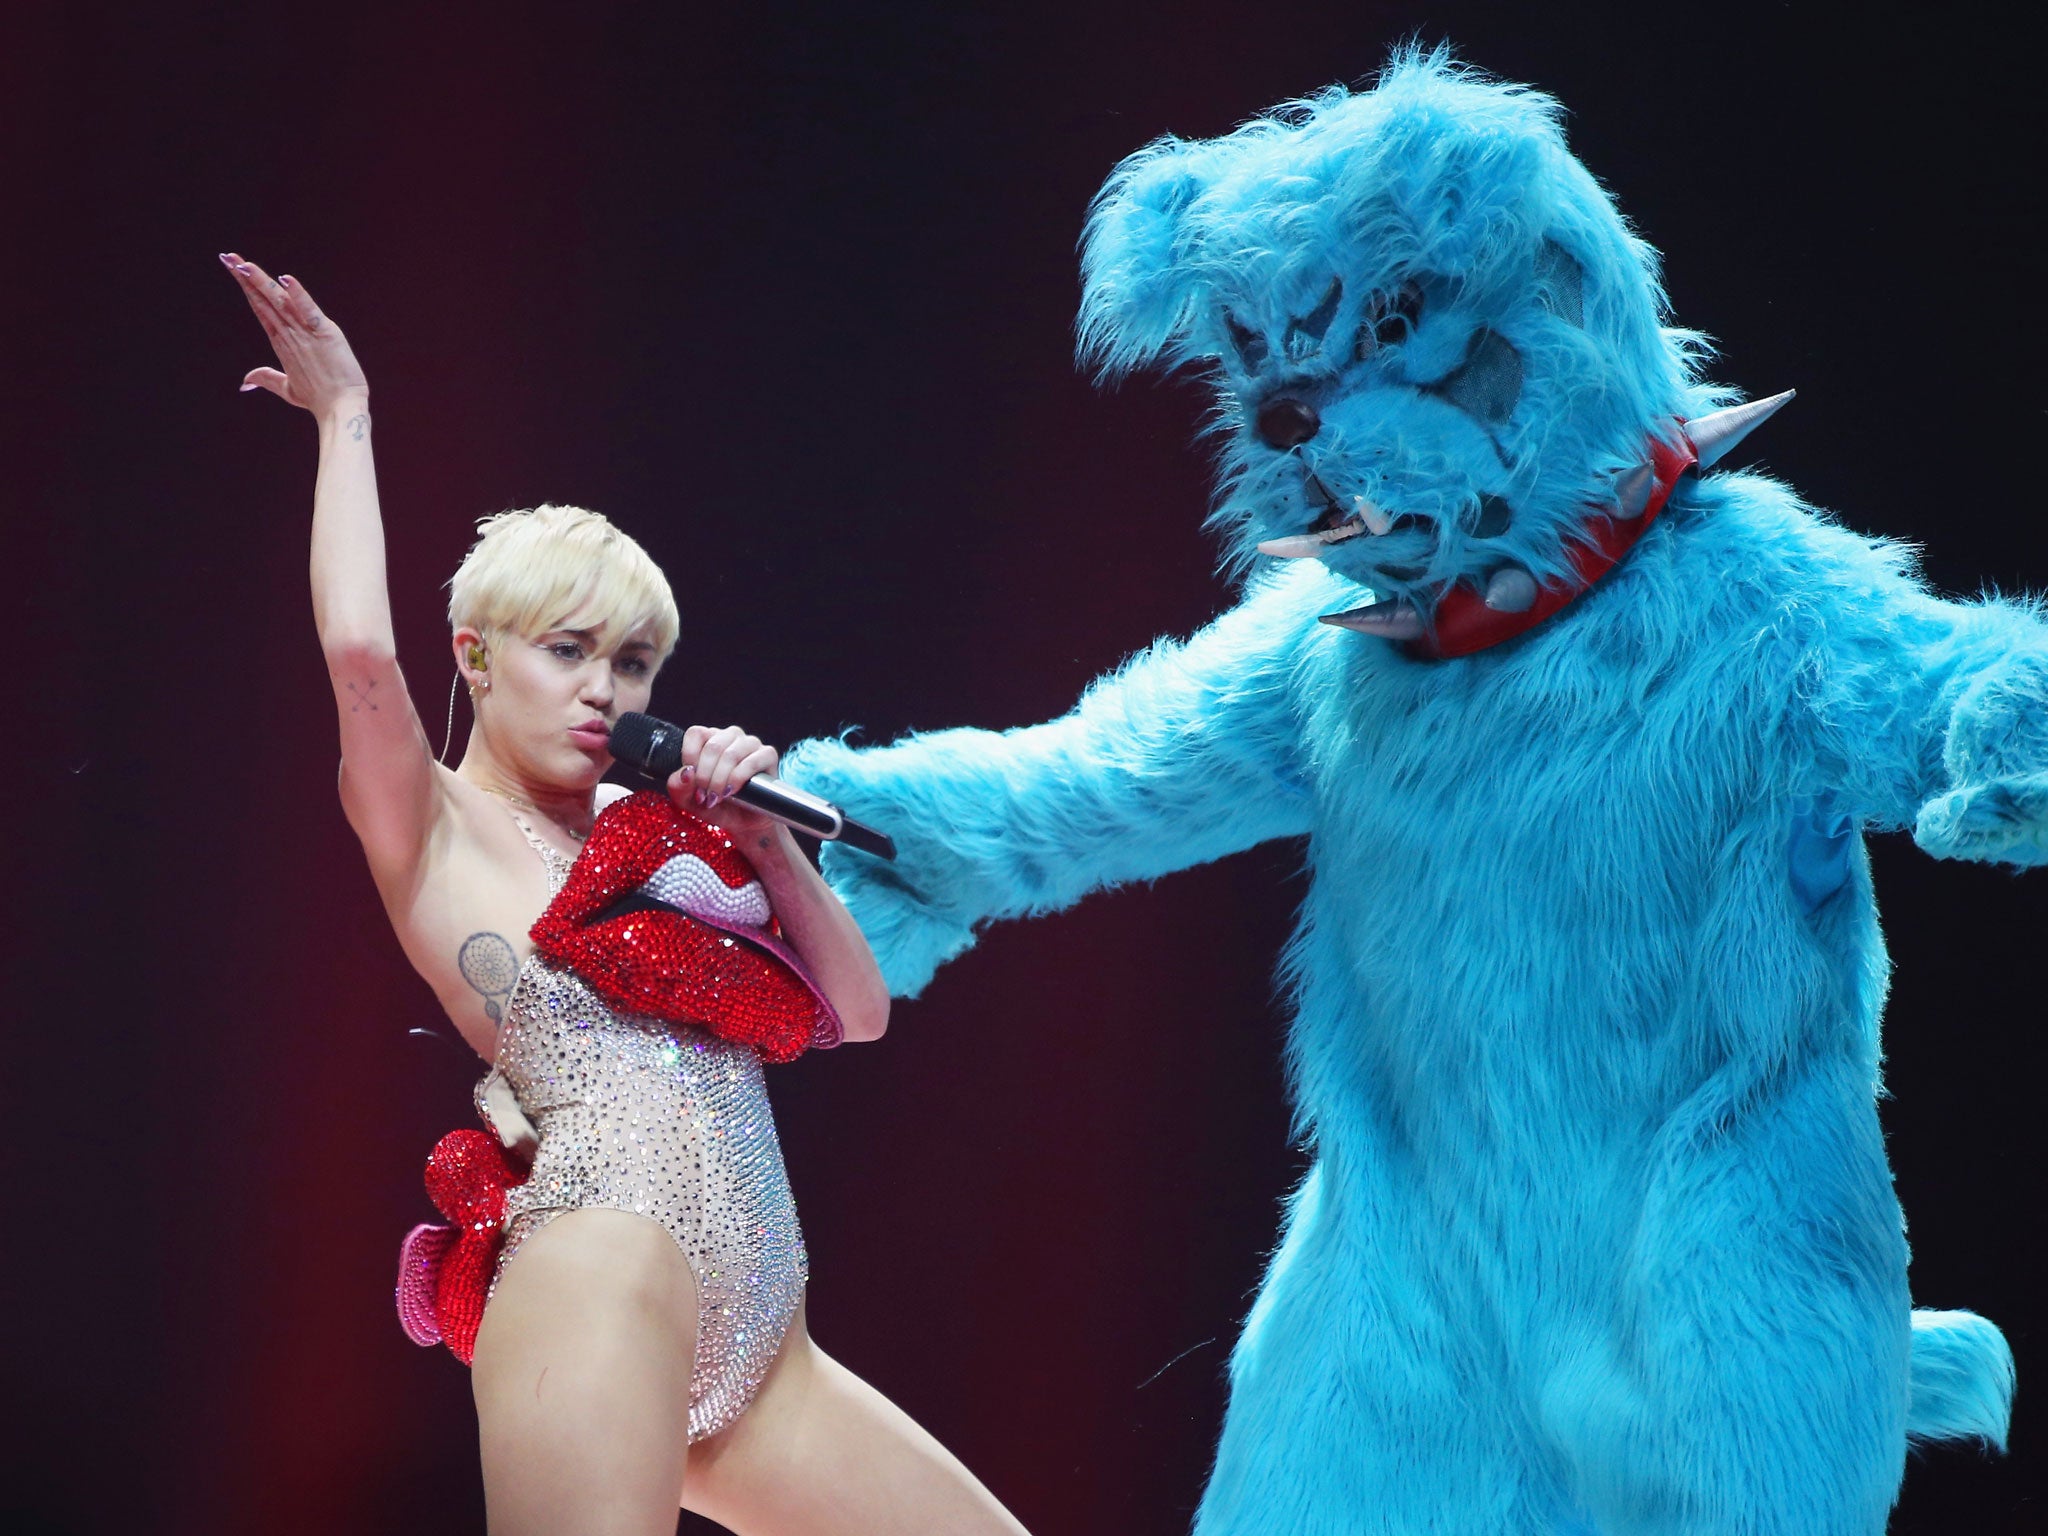 Miley Cyrus brought her Bangerz tour to London's O2 Arena last night